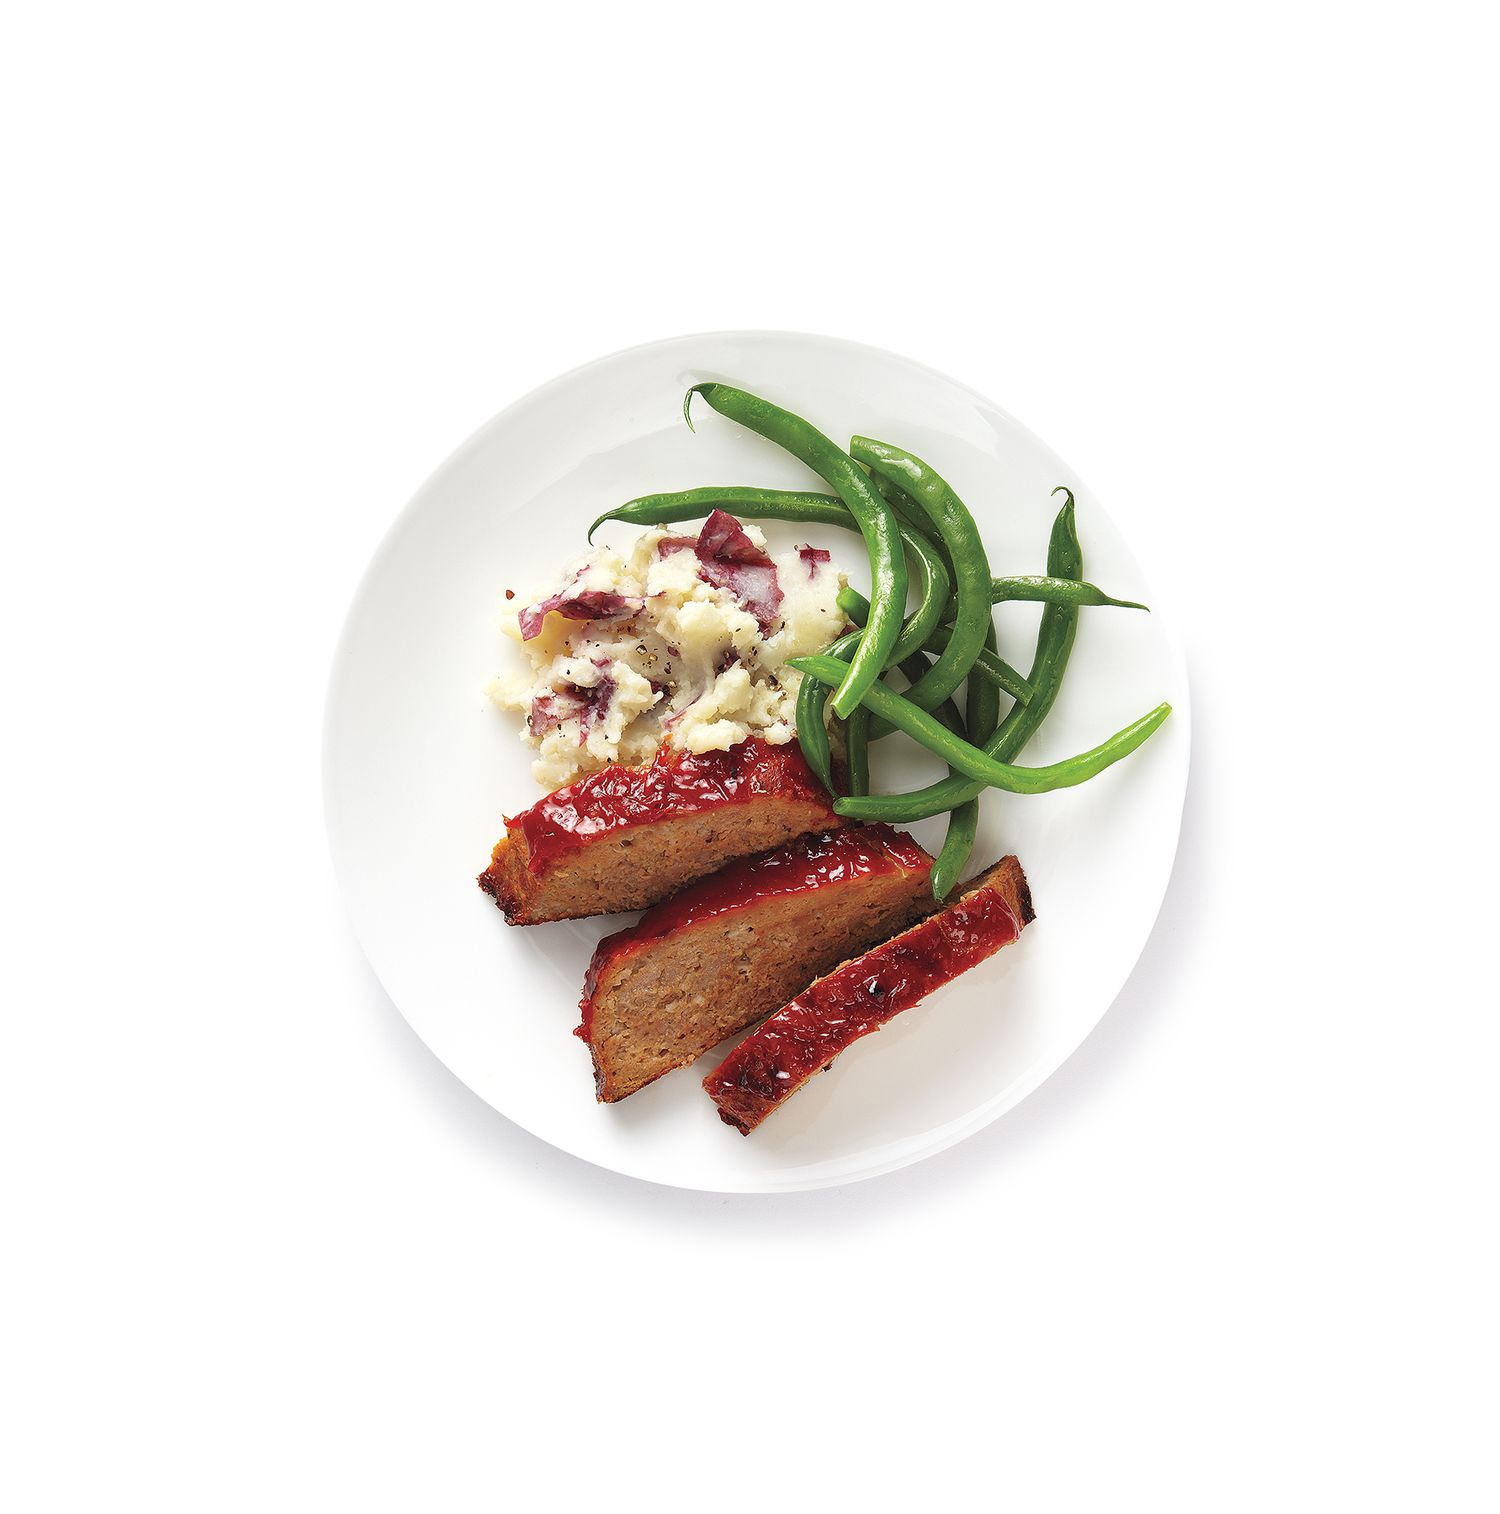 Turkey Meat Loaf With Mashed Potatoes and Green Beans